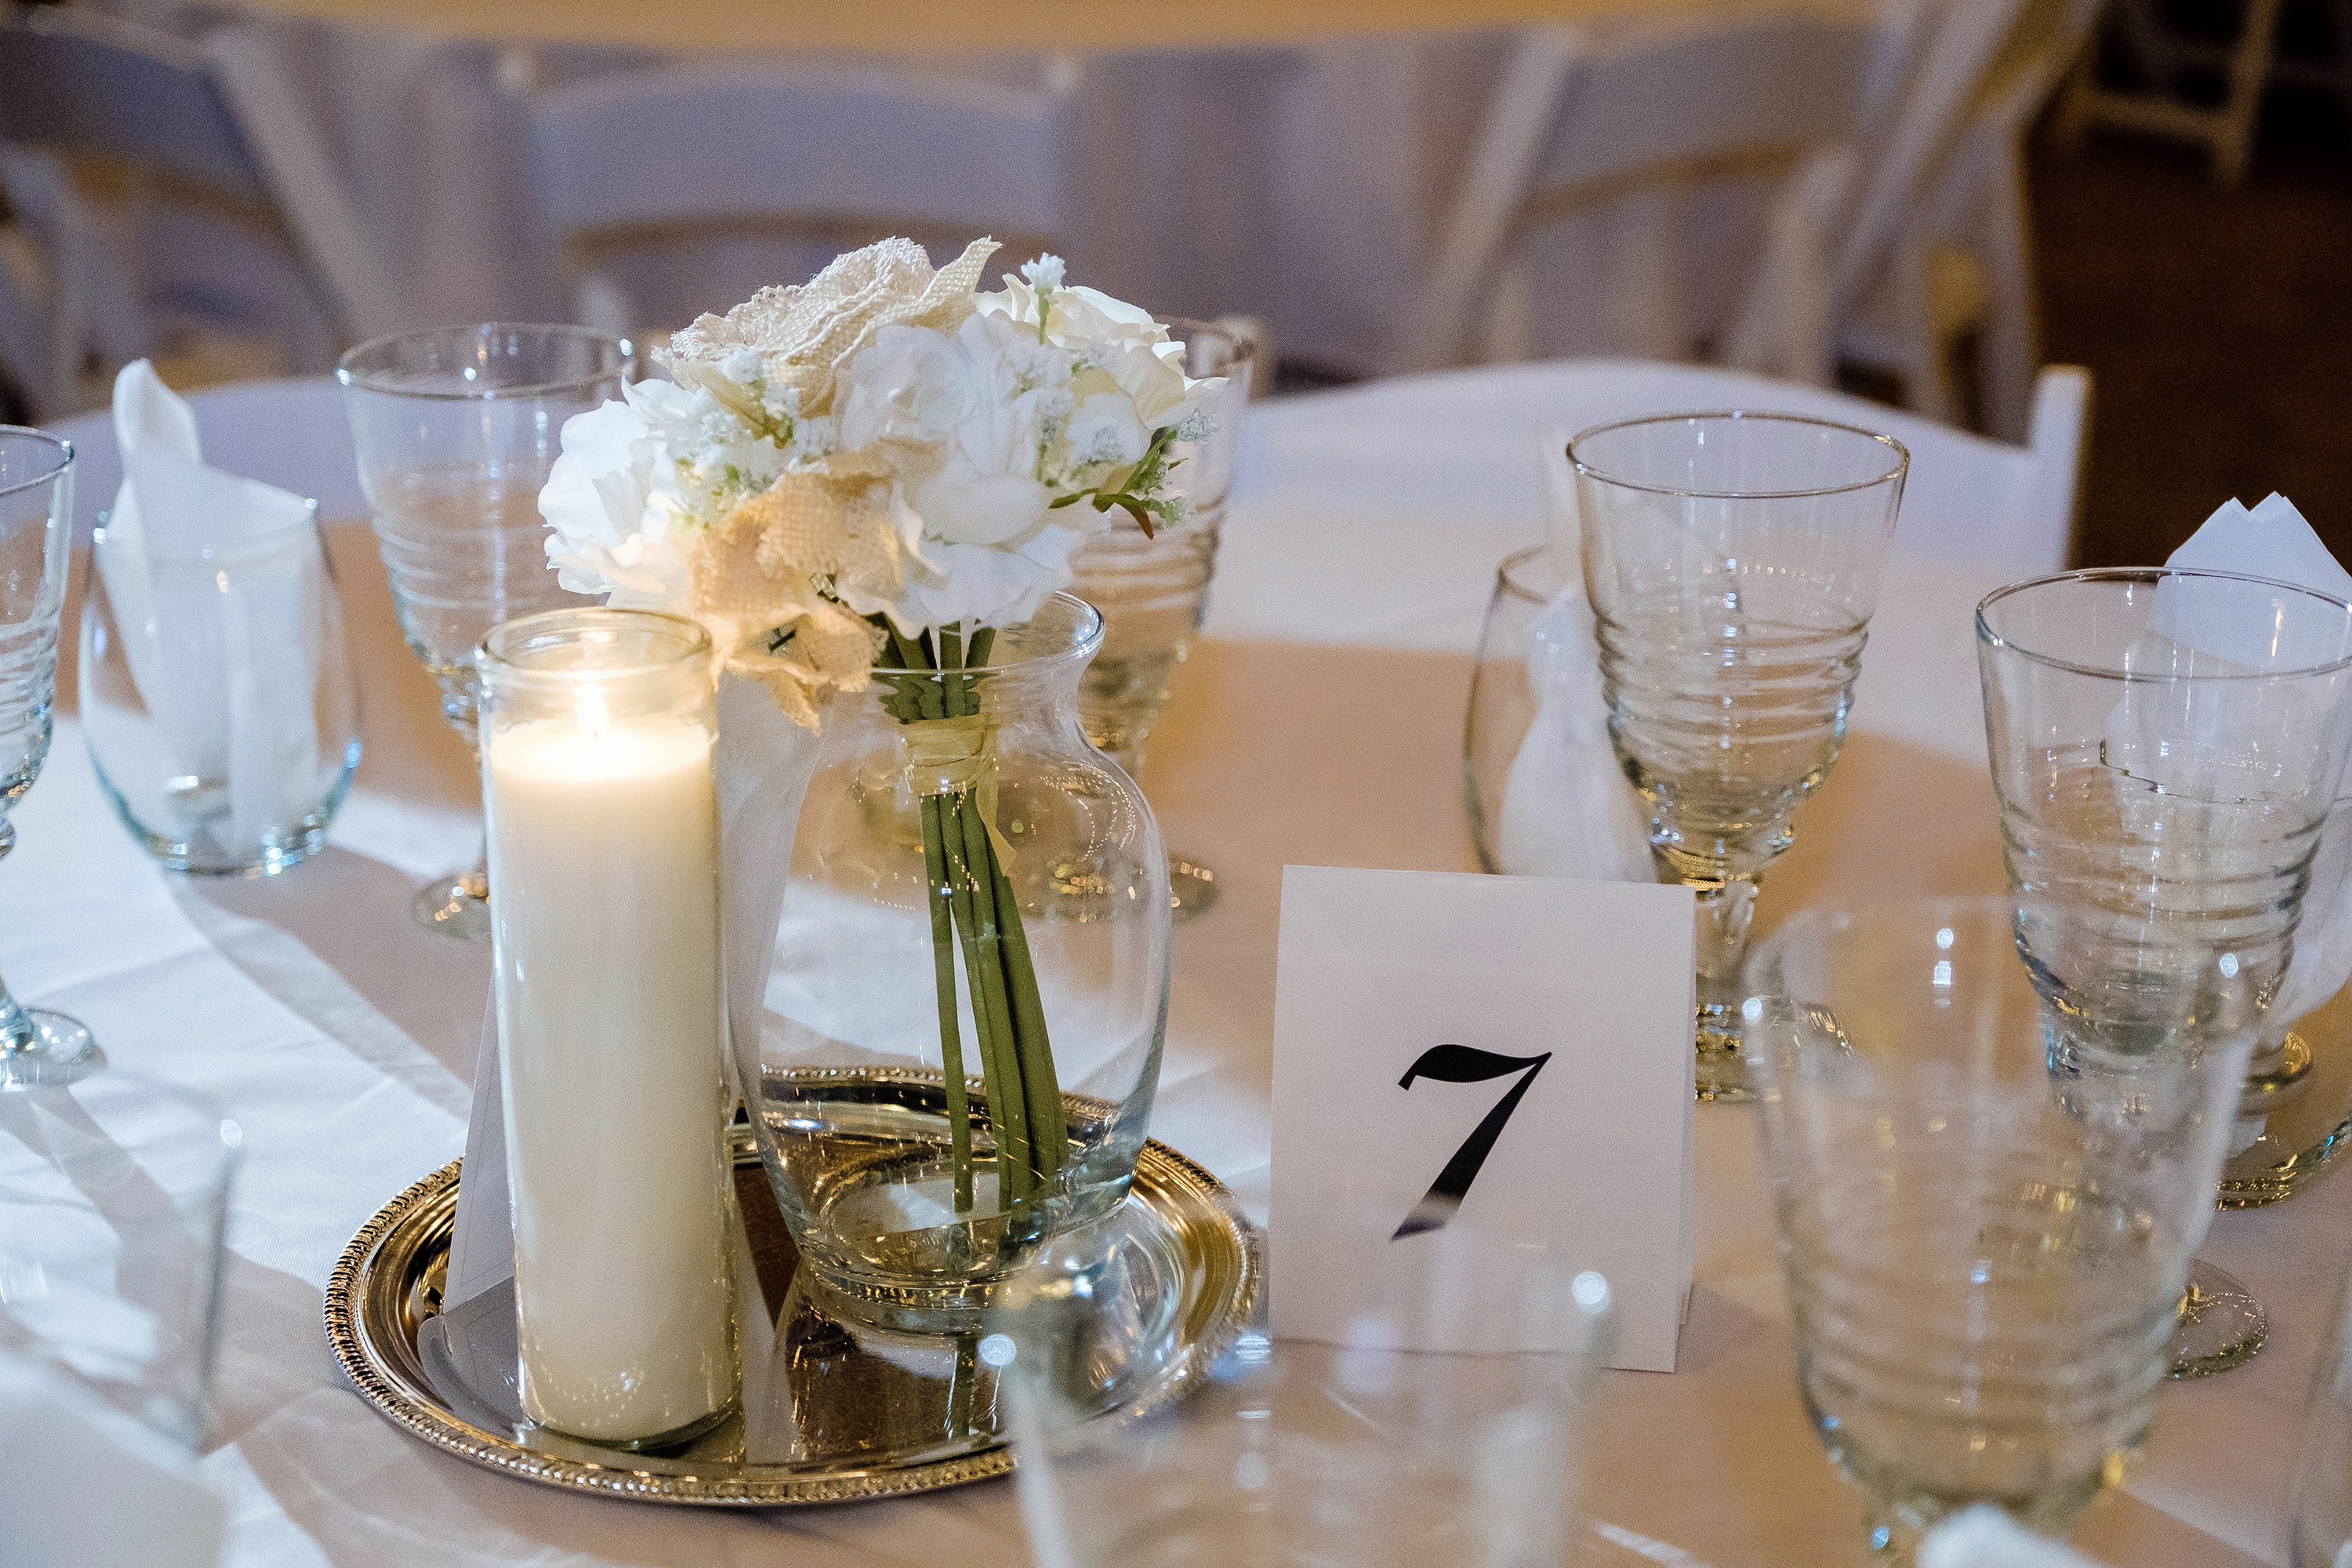 Table details at a backyard wedding reception